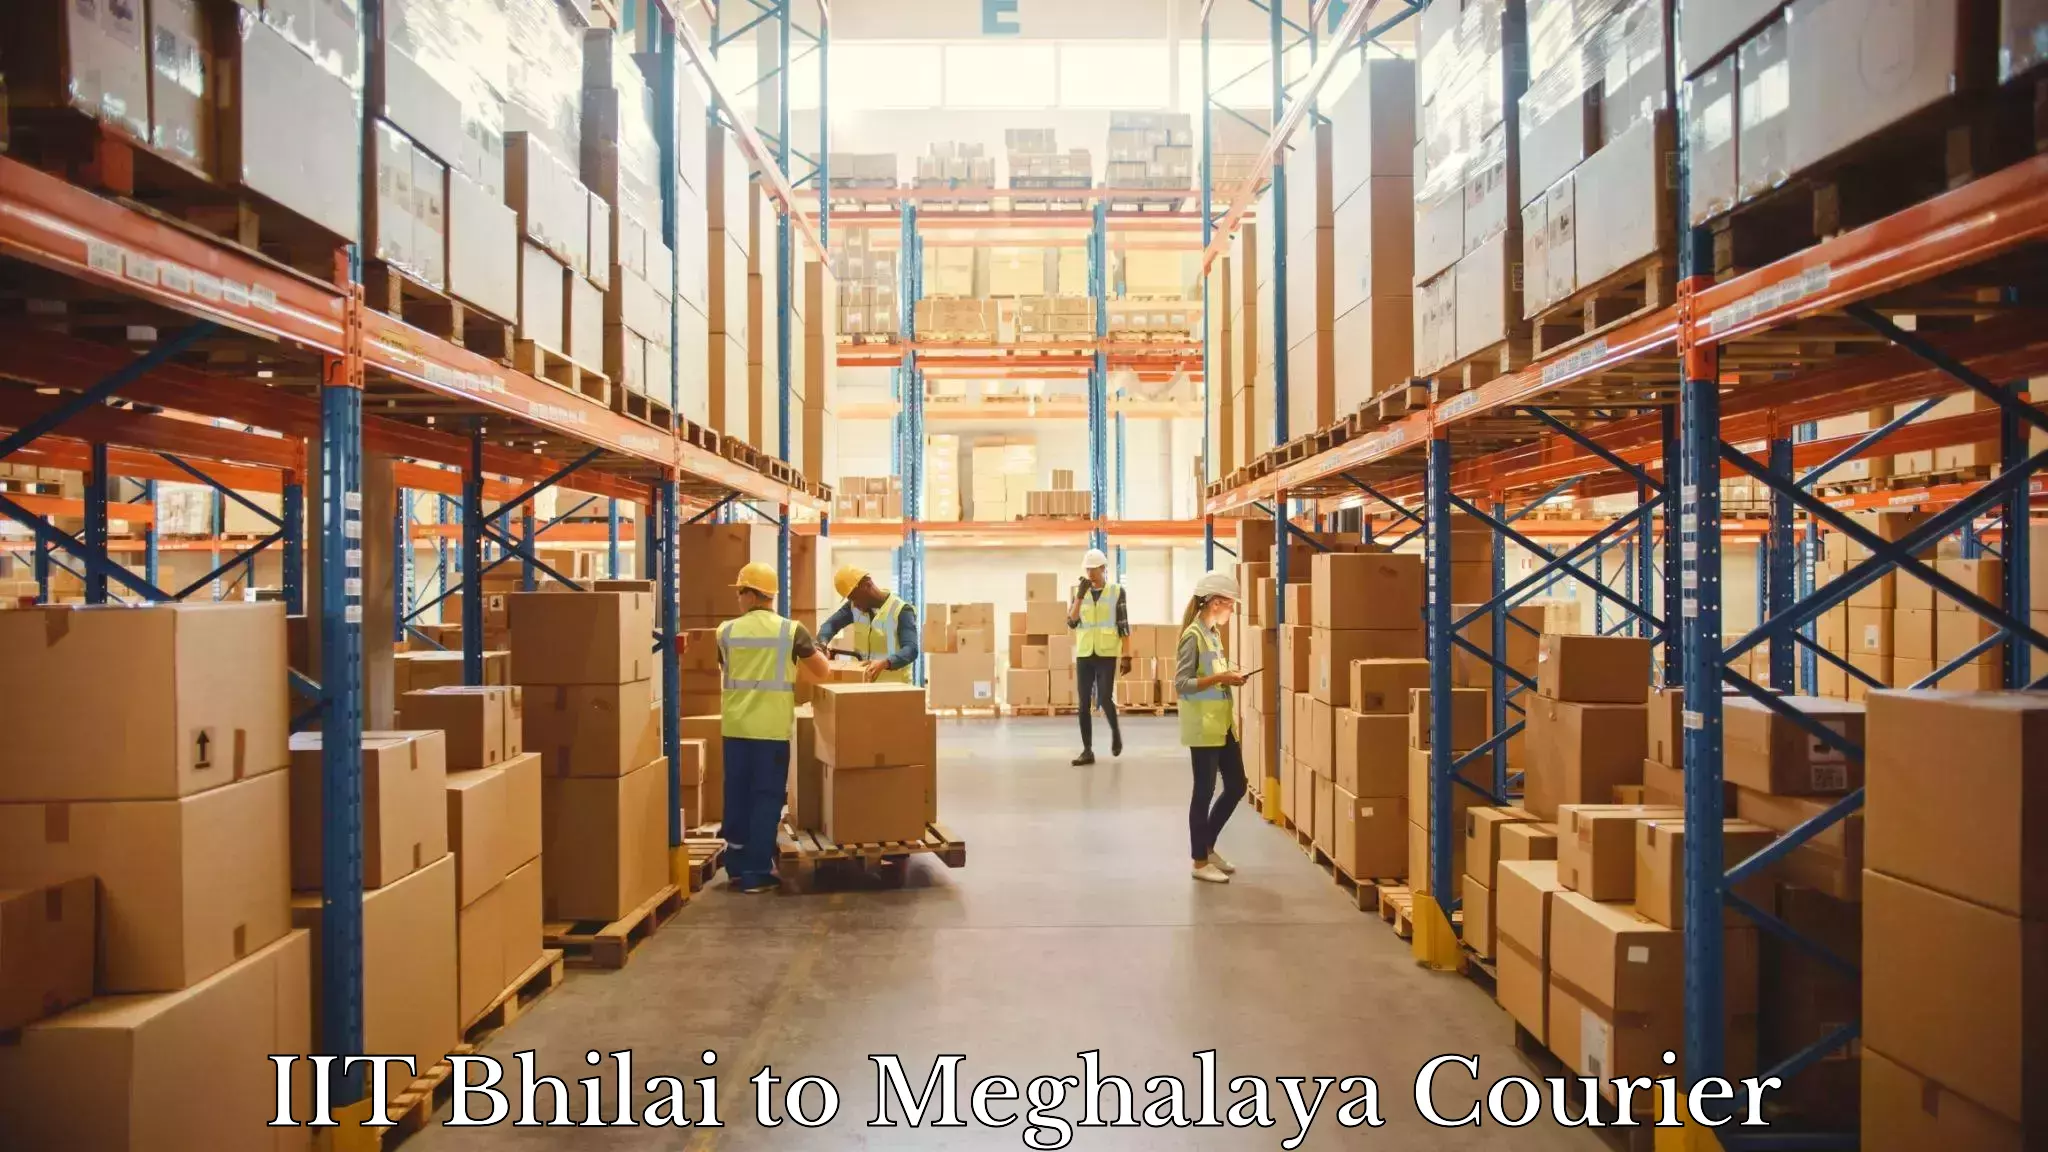 On-call courier service in IIT Bhilai to Meghalaya